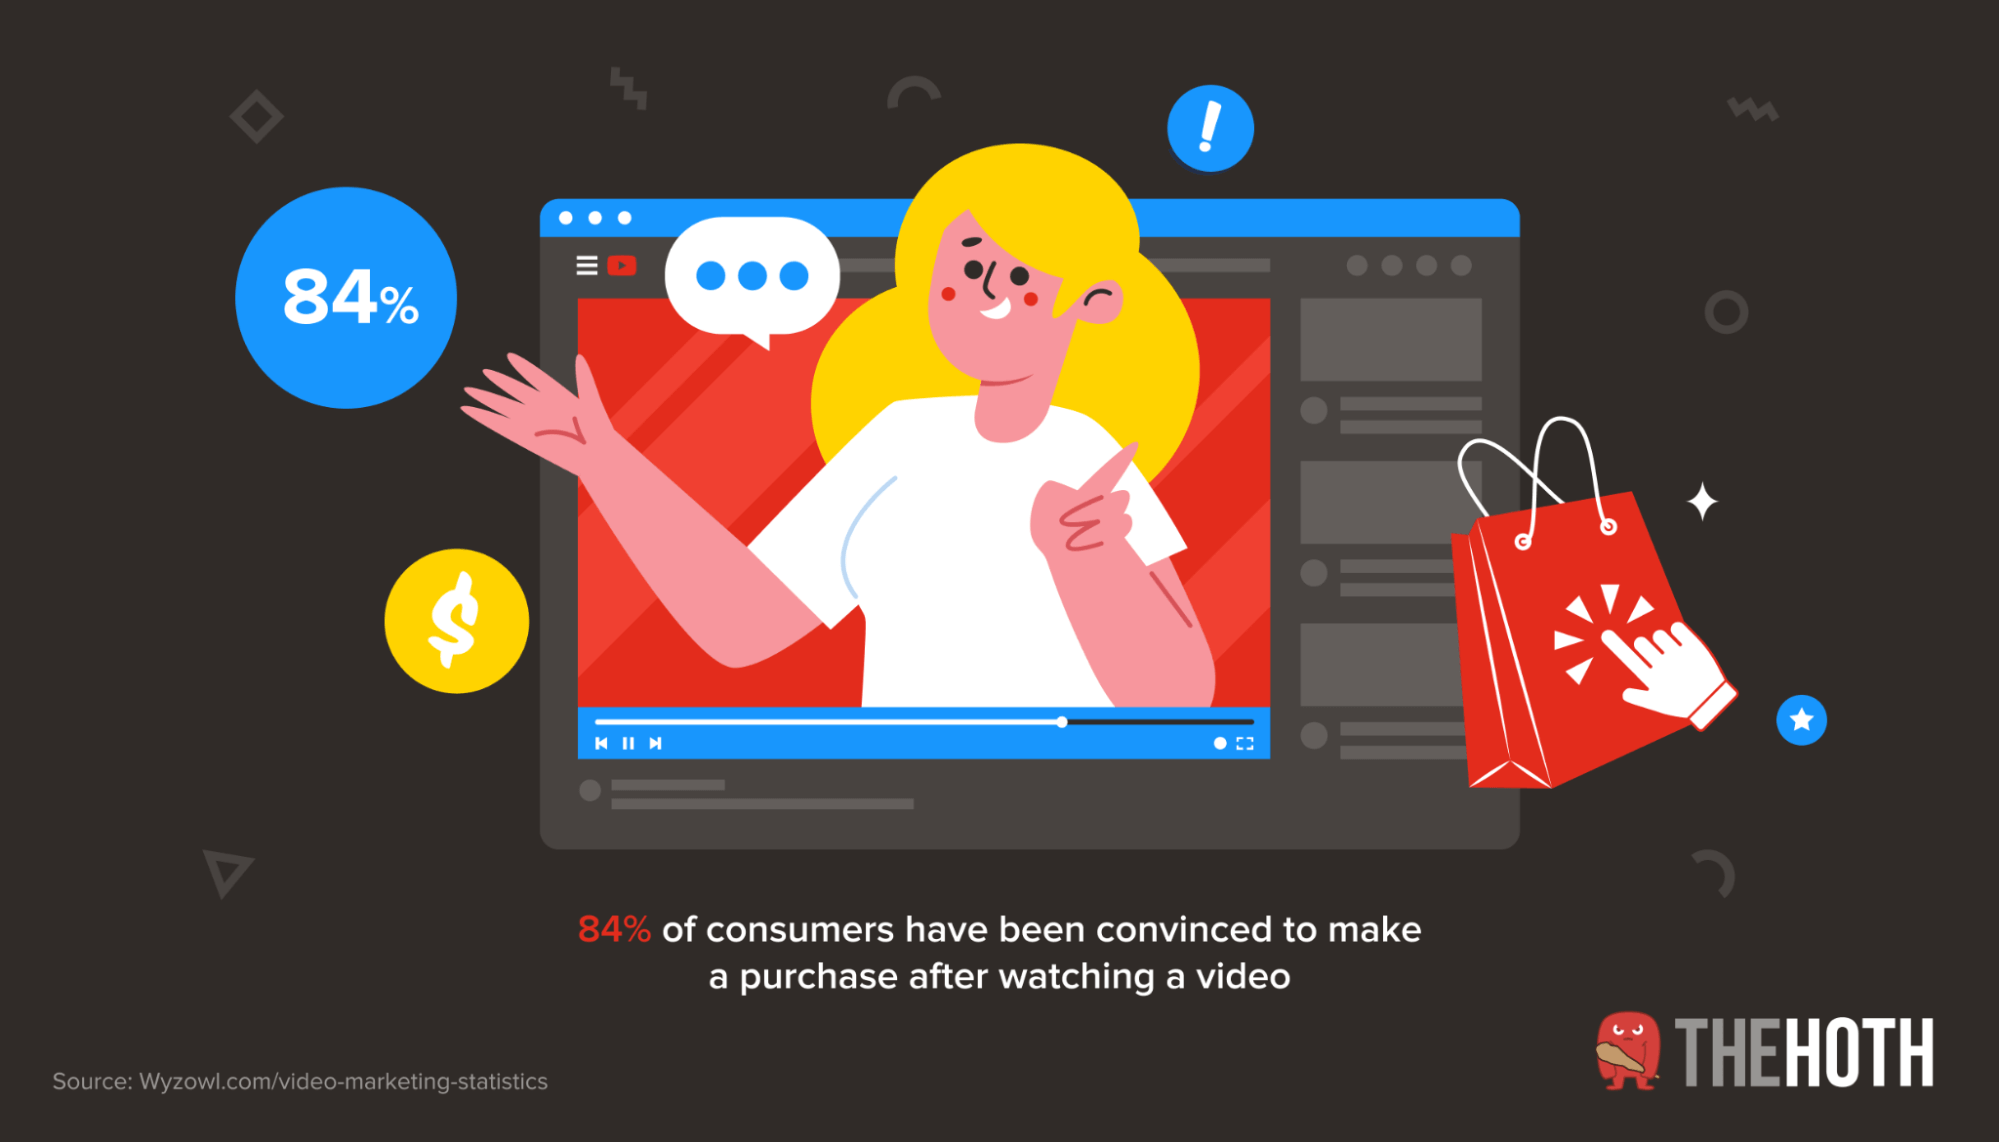 84% of consumers have been convinced to make a purchase after watching a video